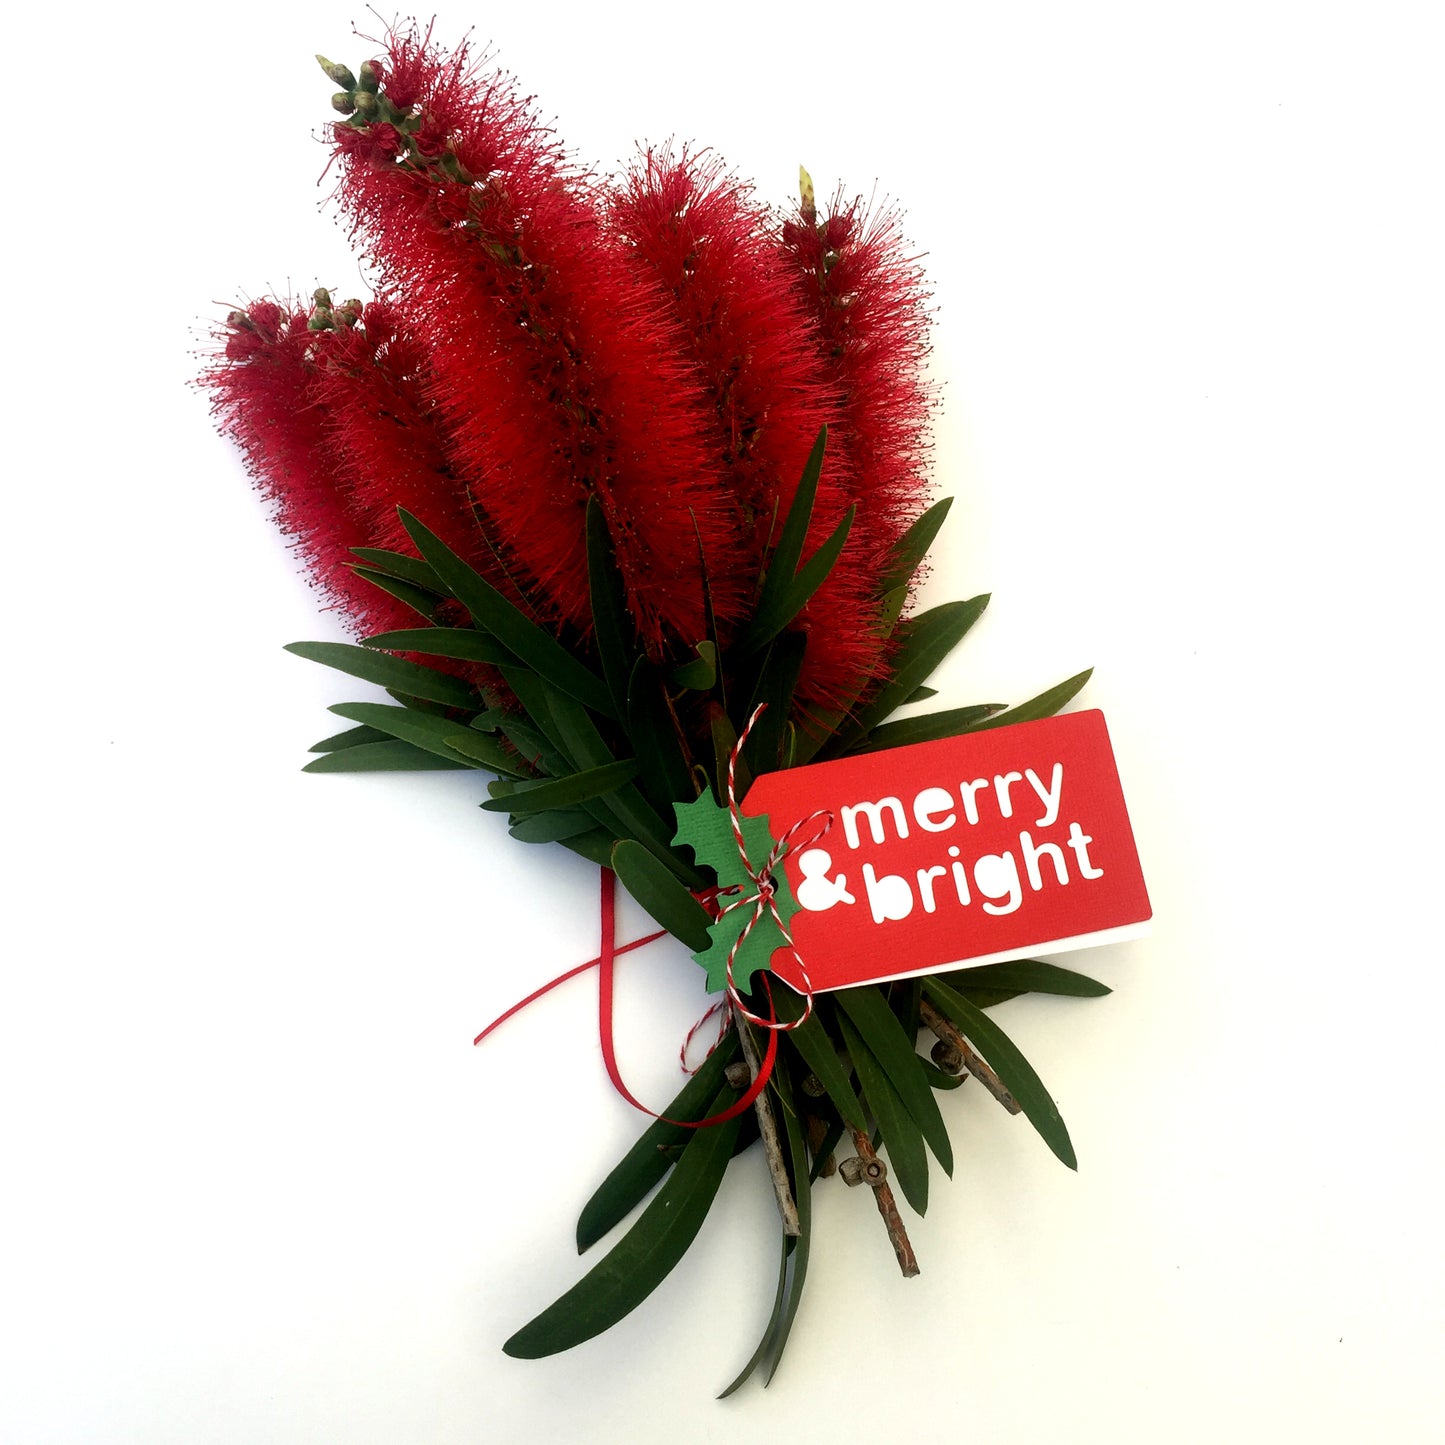 Merry & Bright Christmas gift tags.